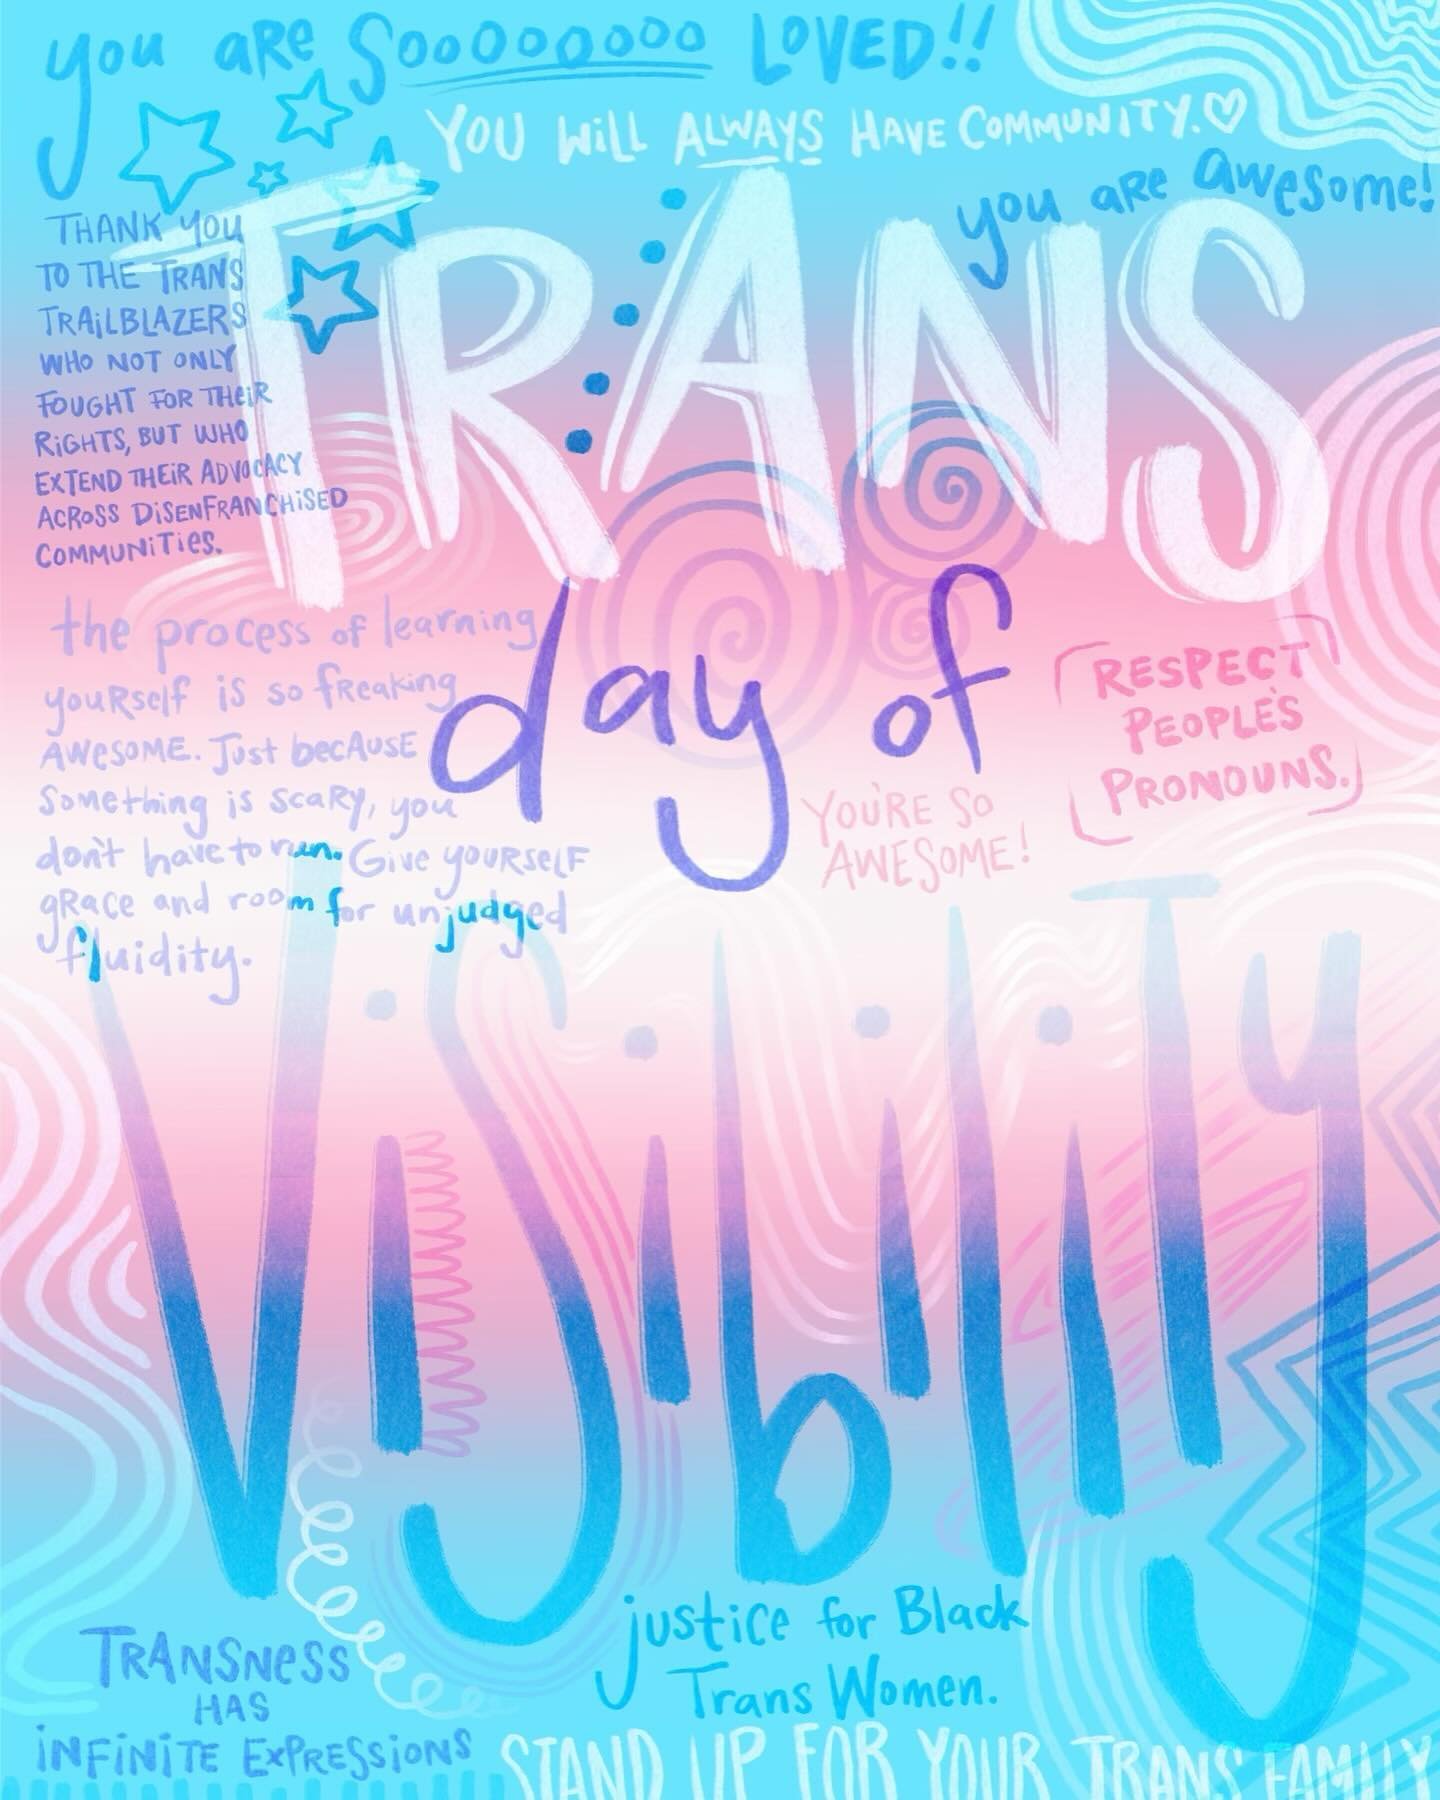 It&rsquo;s #nationaltransdayofvisibility !! Give yourself a hug often and remember that just being you is a gift to the world. There will always be community and there will always be unending love for trans people🏳️&zwj;⚧️🩷